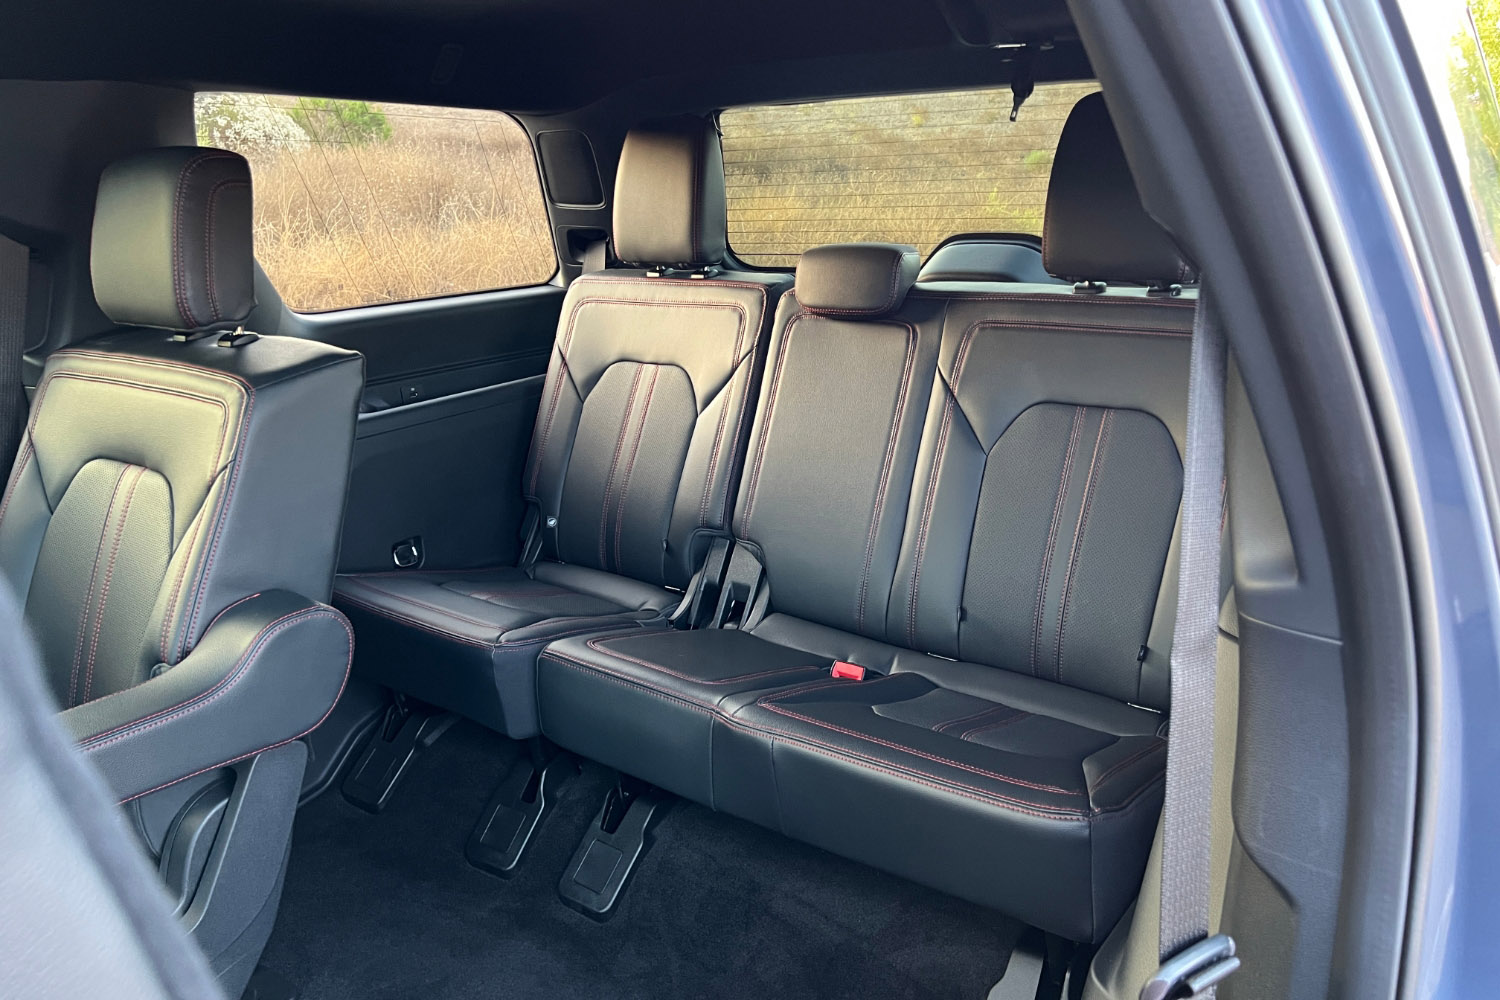 2022 Ford Expedition Limited, interior, third-row seat